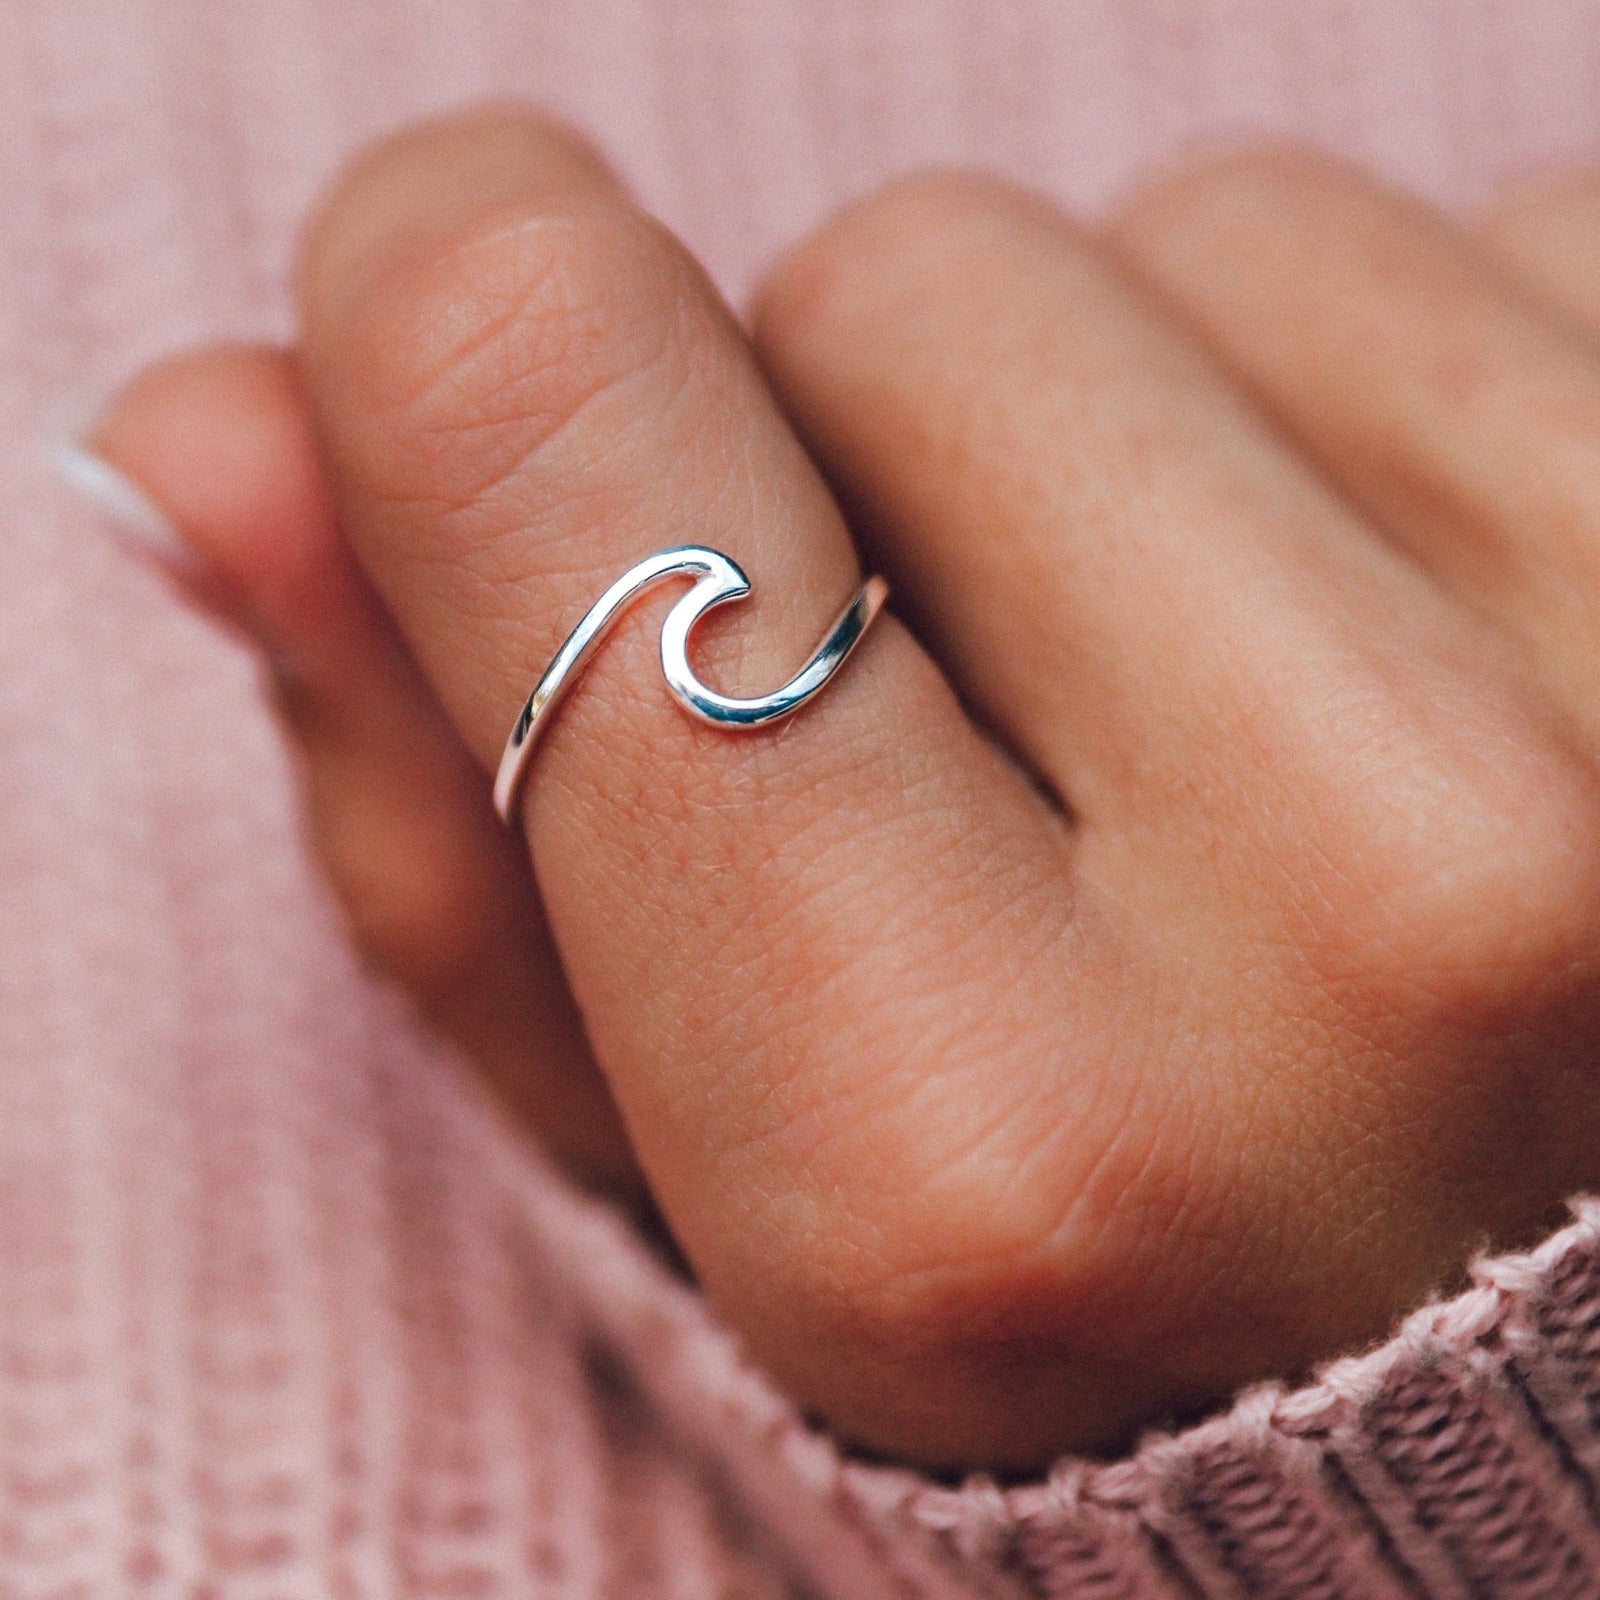 Silver rings - Jewelry